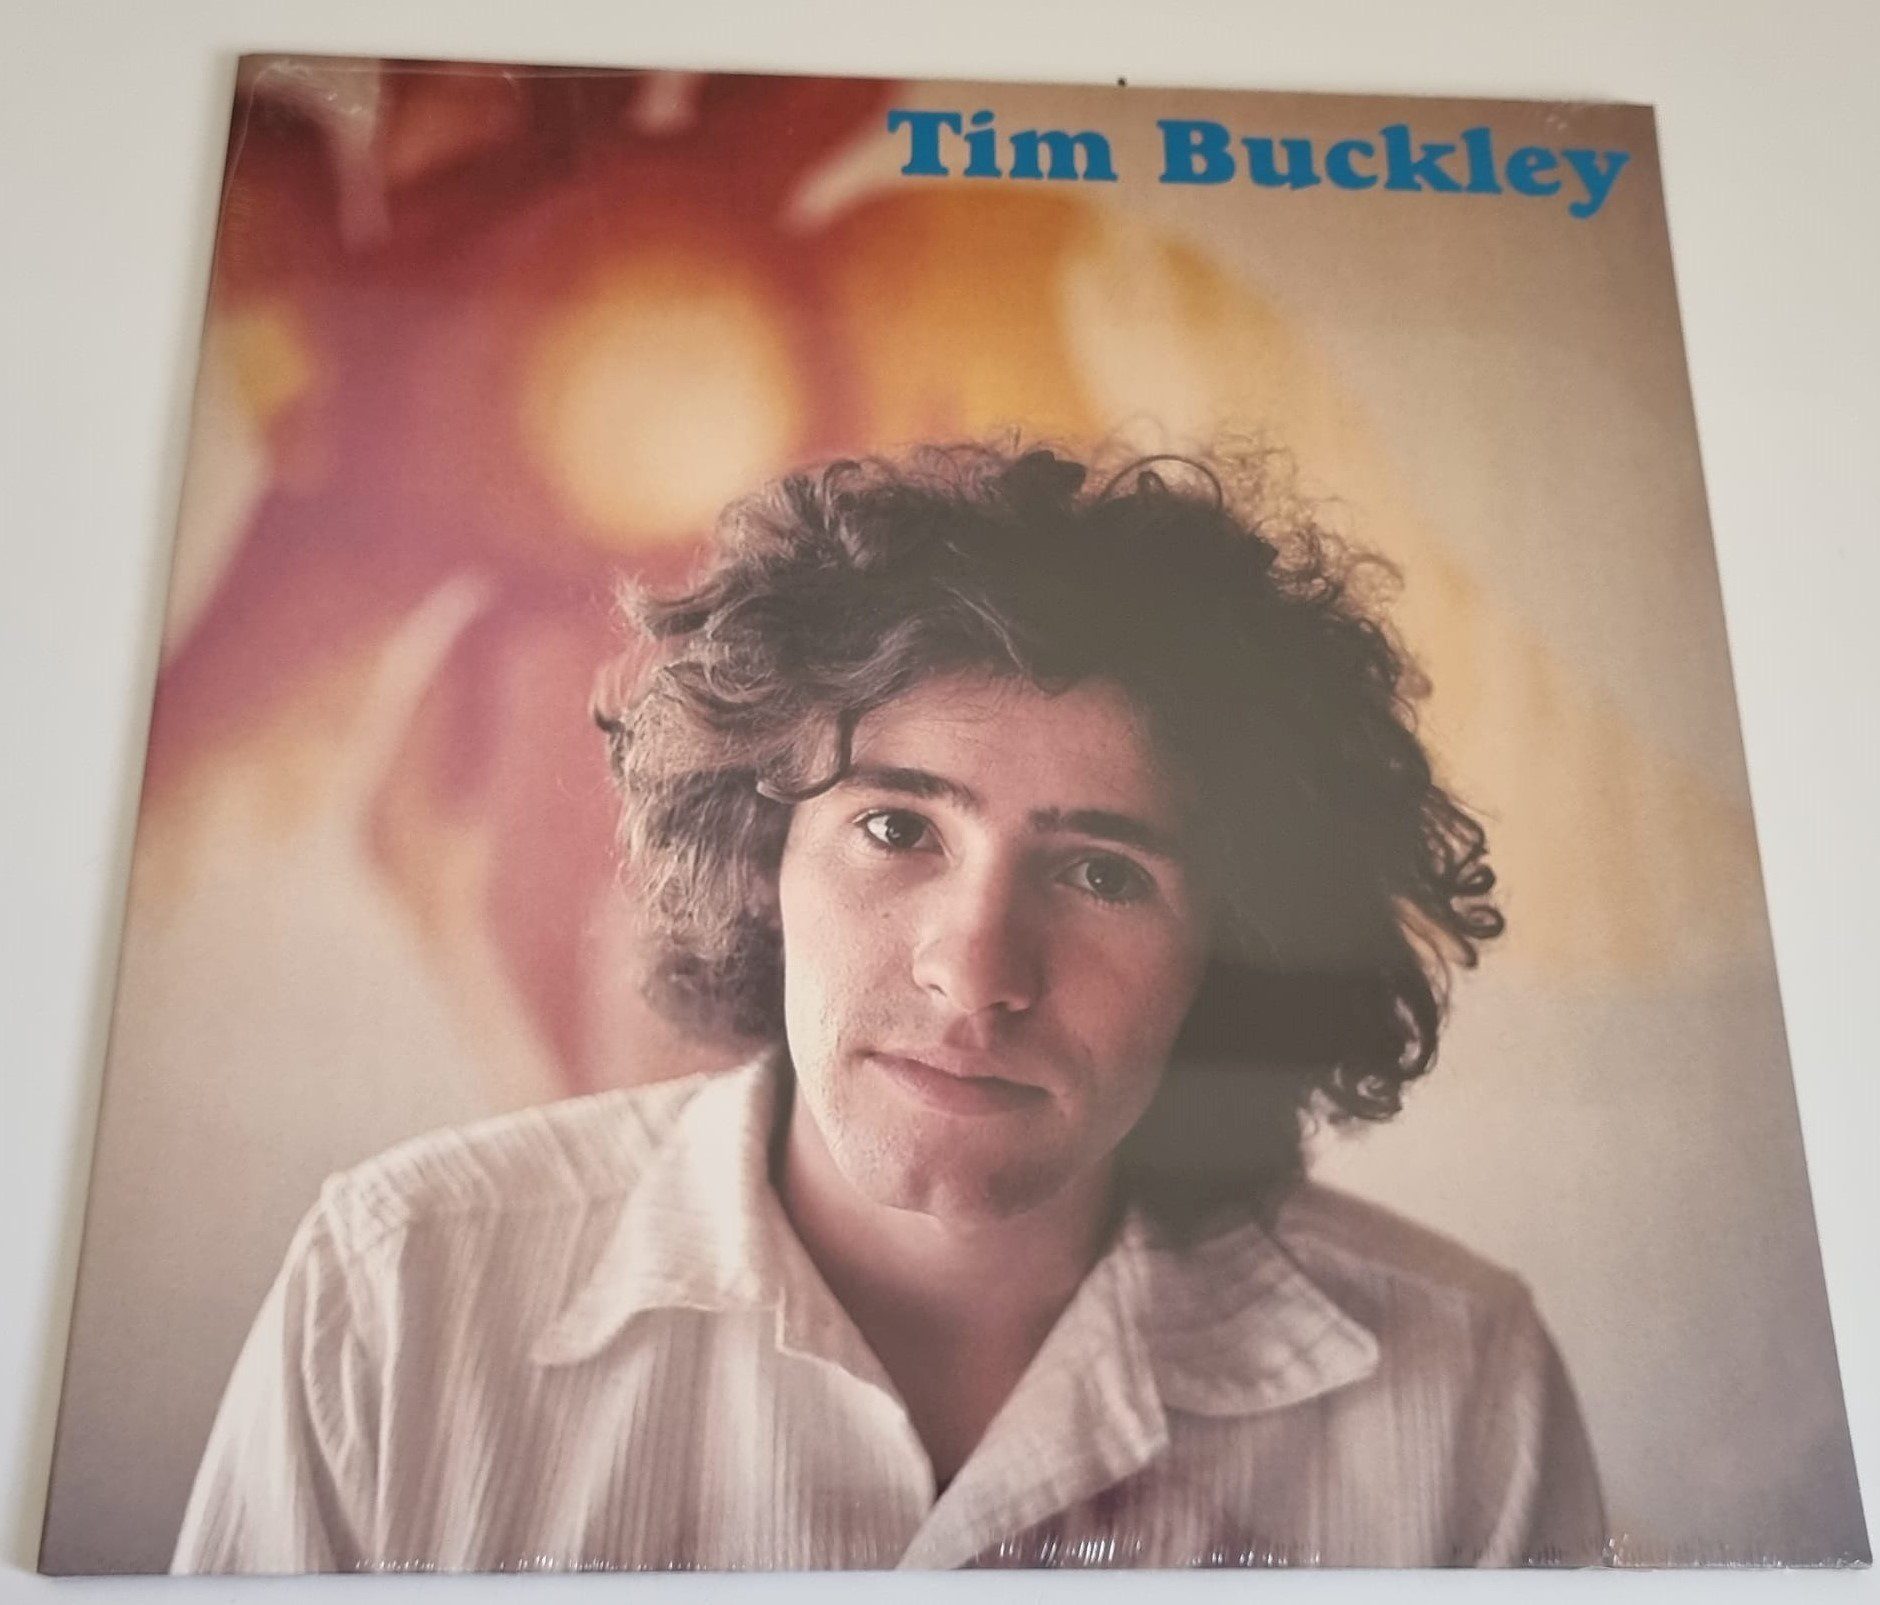 Buy this rare Tim Buckley record by clicking here